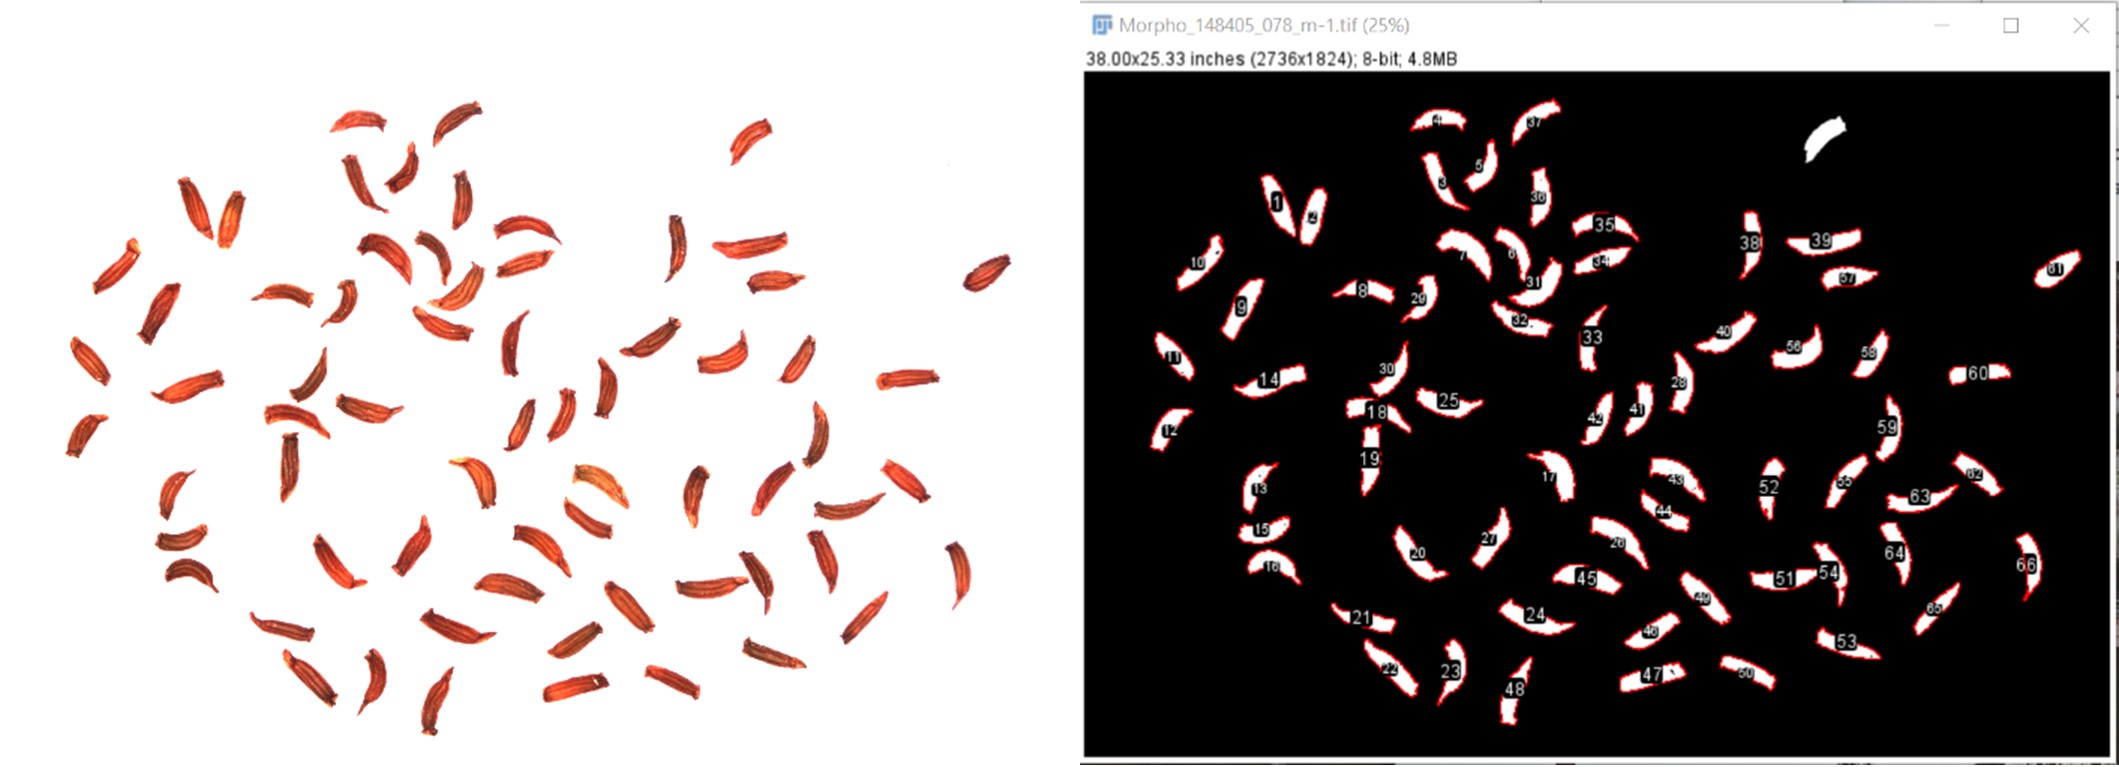 Two images side by side. The image on the left has a white background scattered with lots of small curved light brown seeds. The image on the right is the same image as on the left but with the colours inverted so the seeds are on a black background with each individual seed numbered.